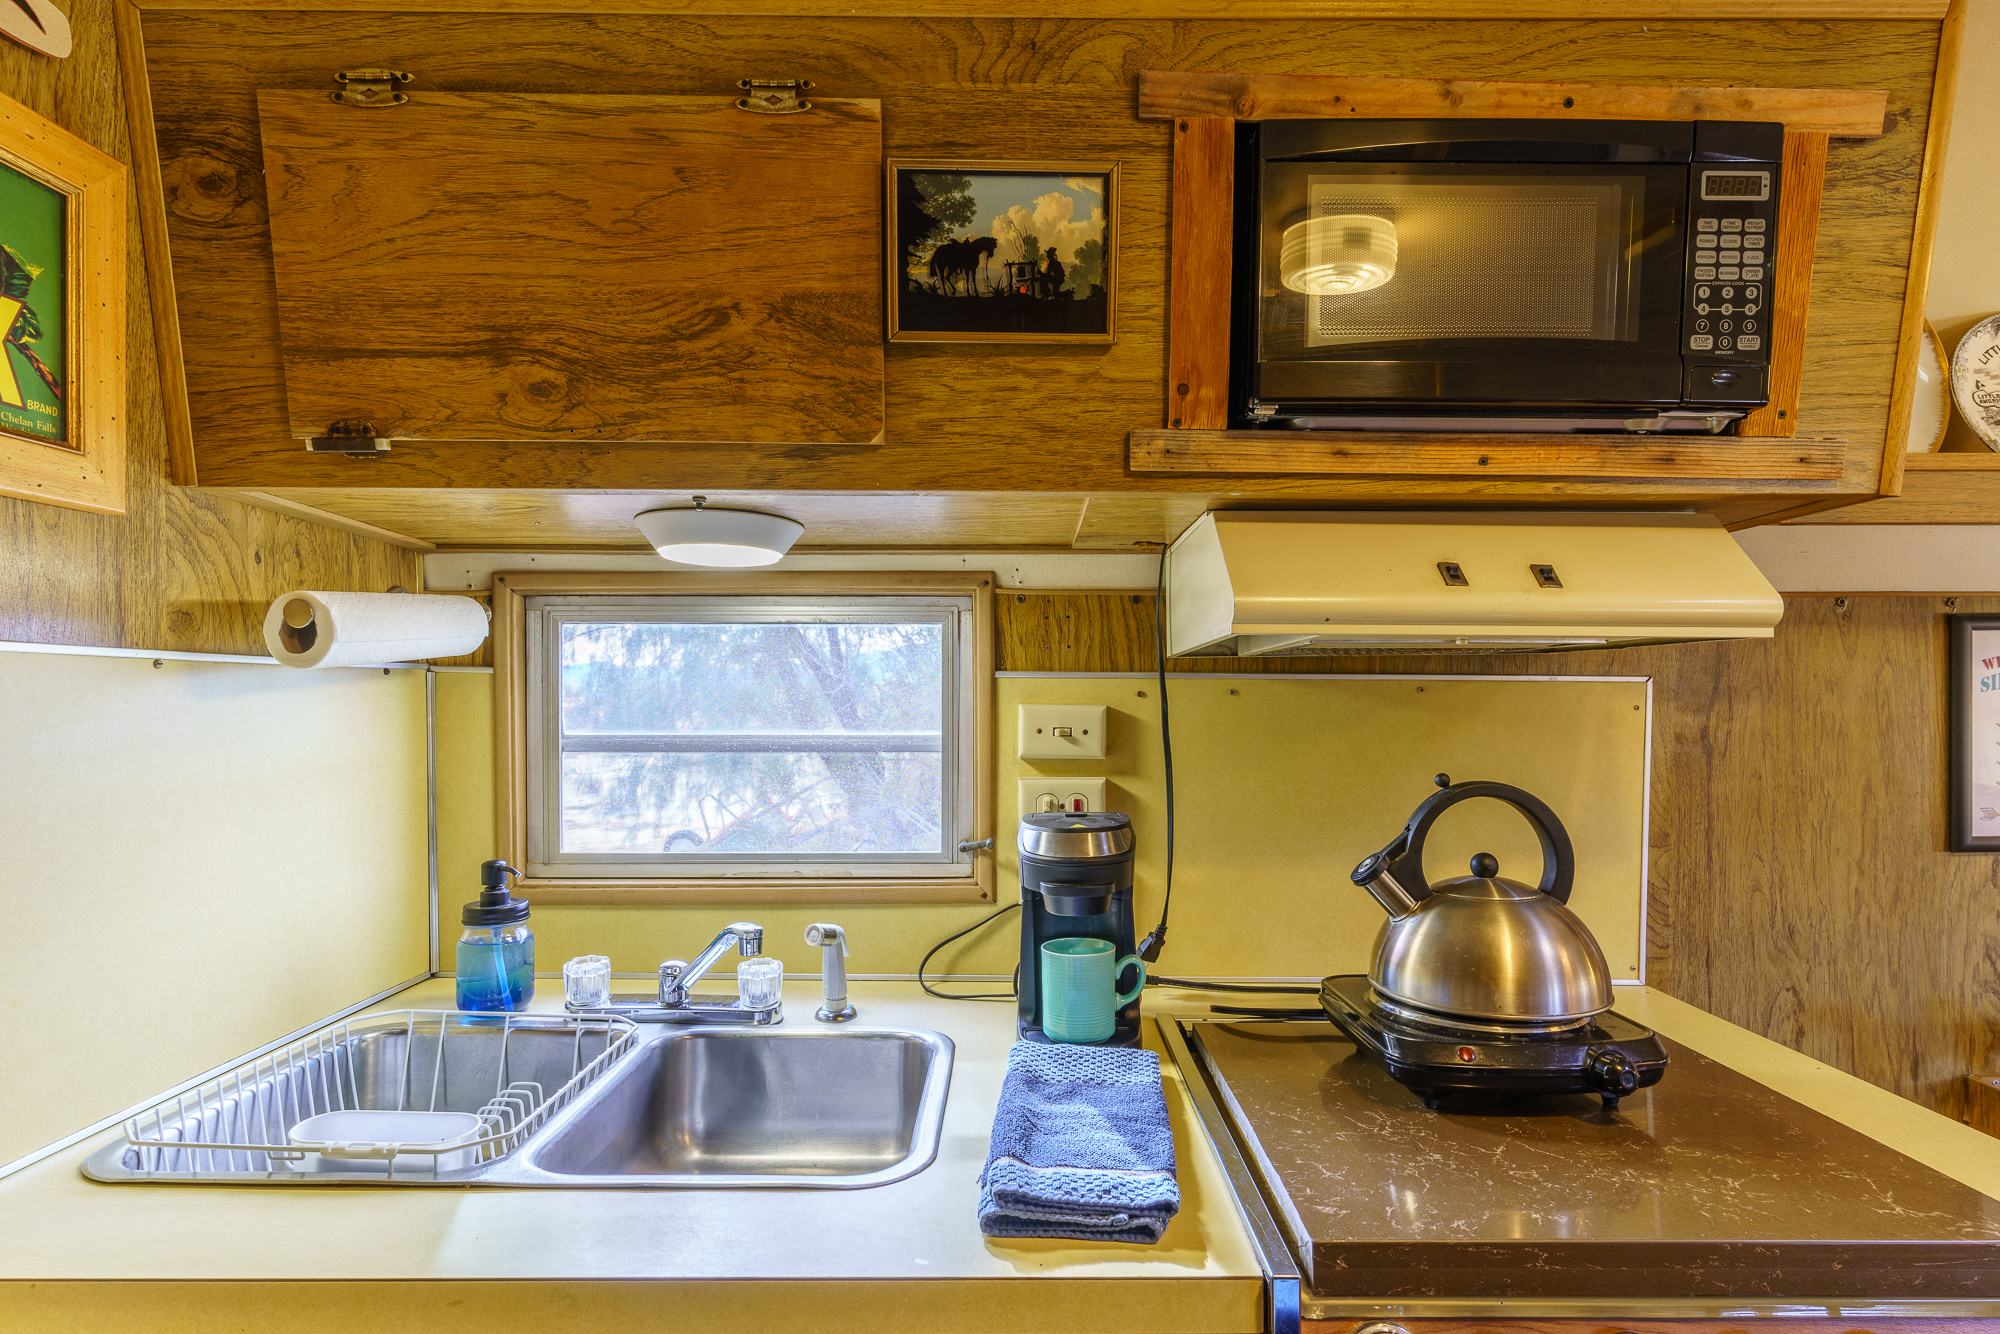 A kitchenette with sink, dish rack, tea kettle, coffee machine, small camping stove, and a microwave.